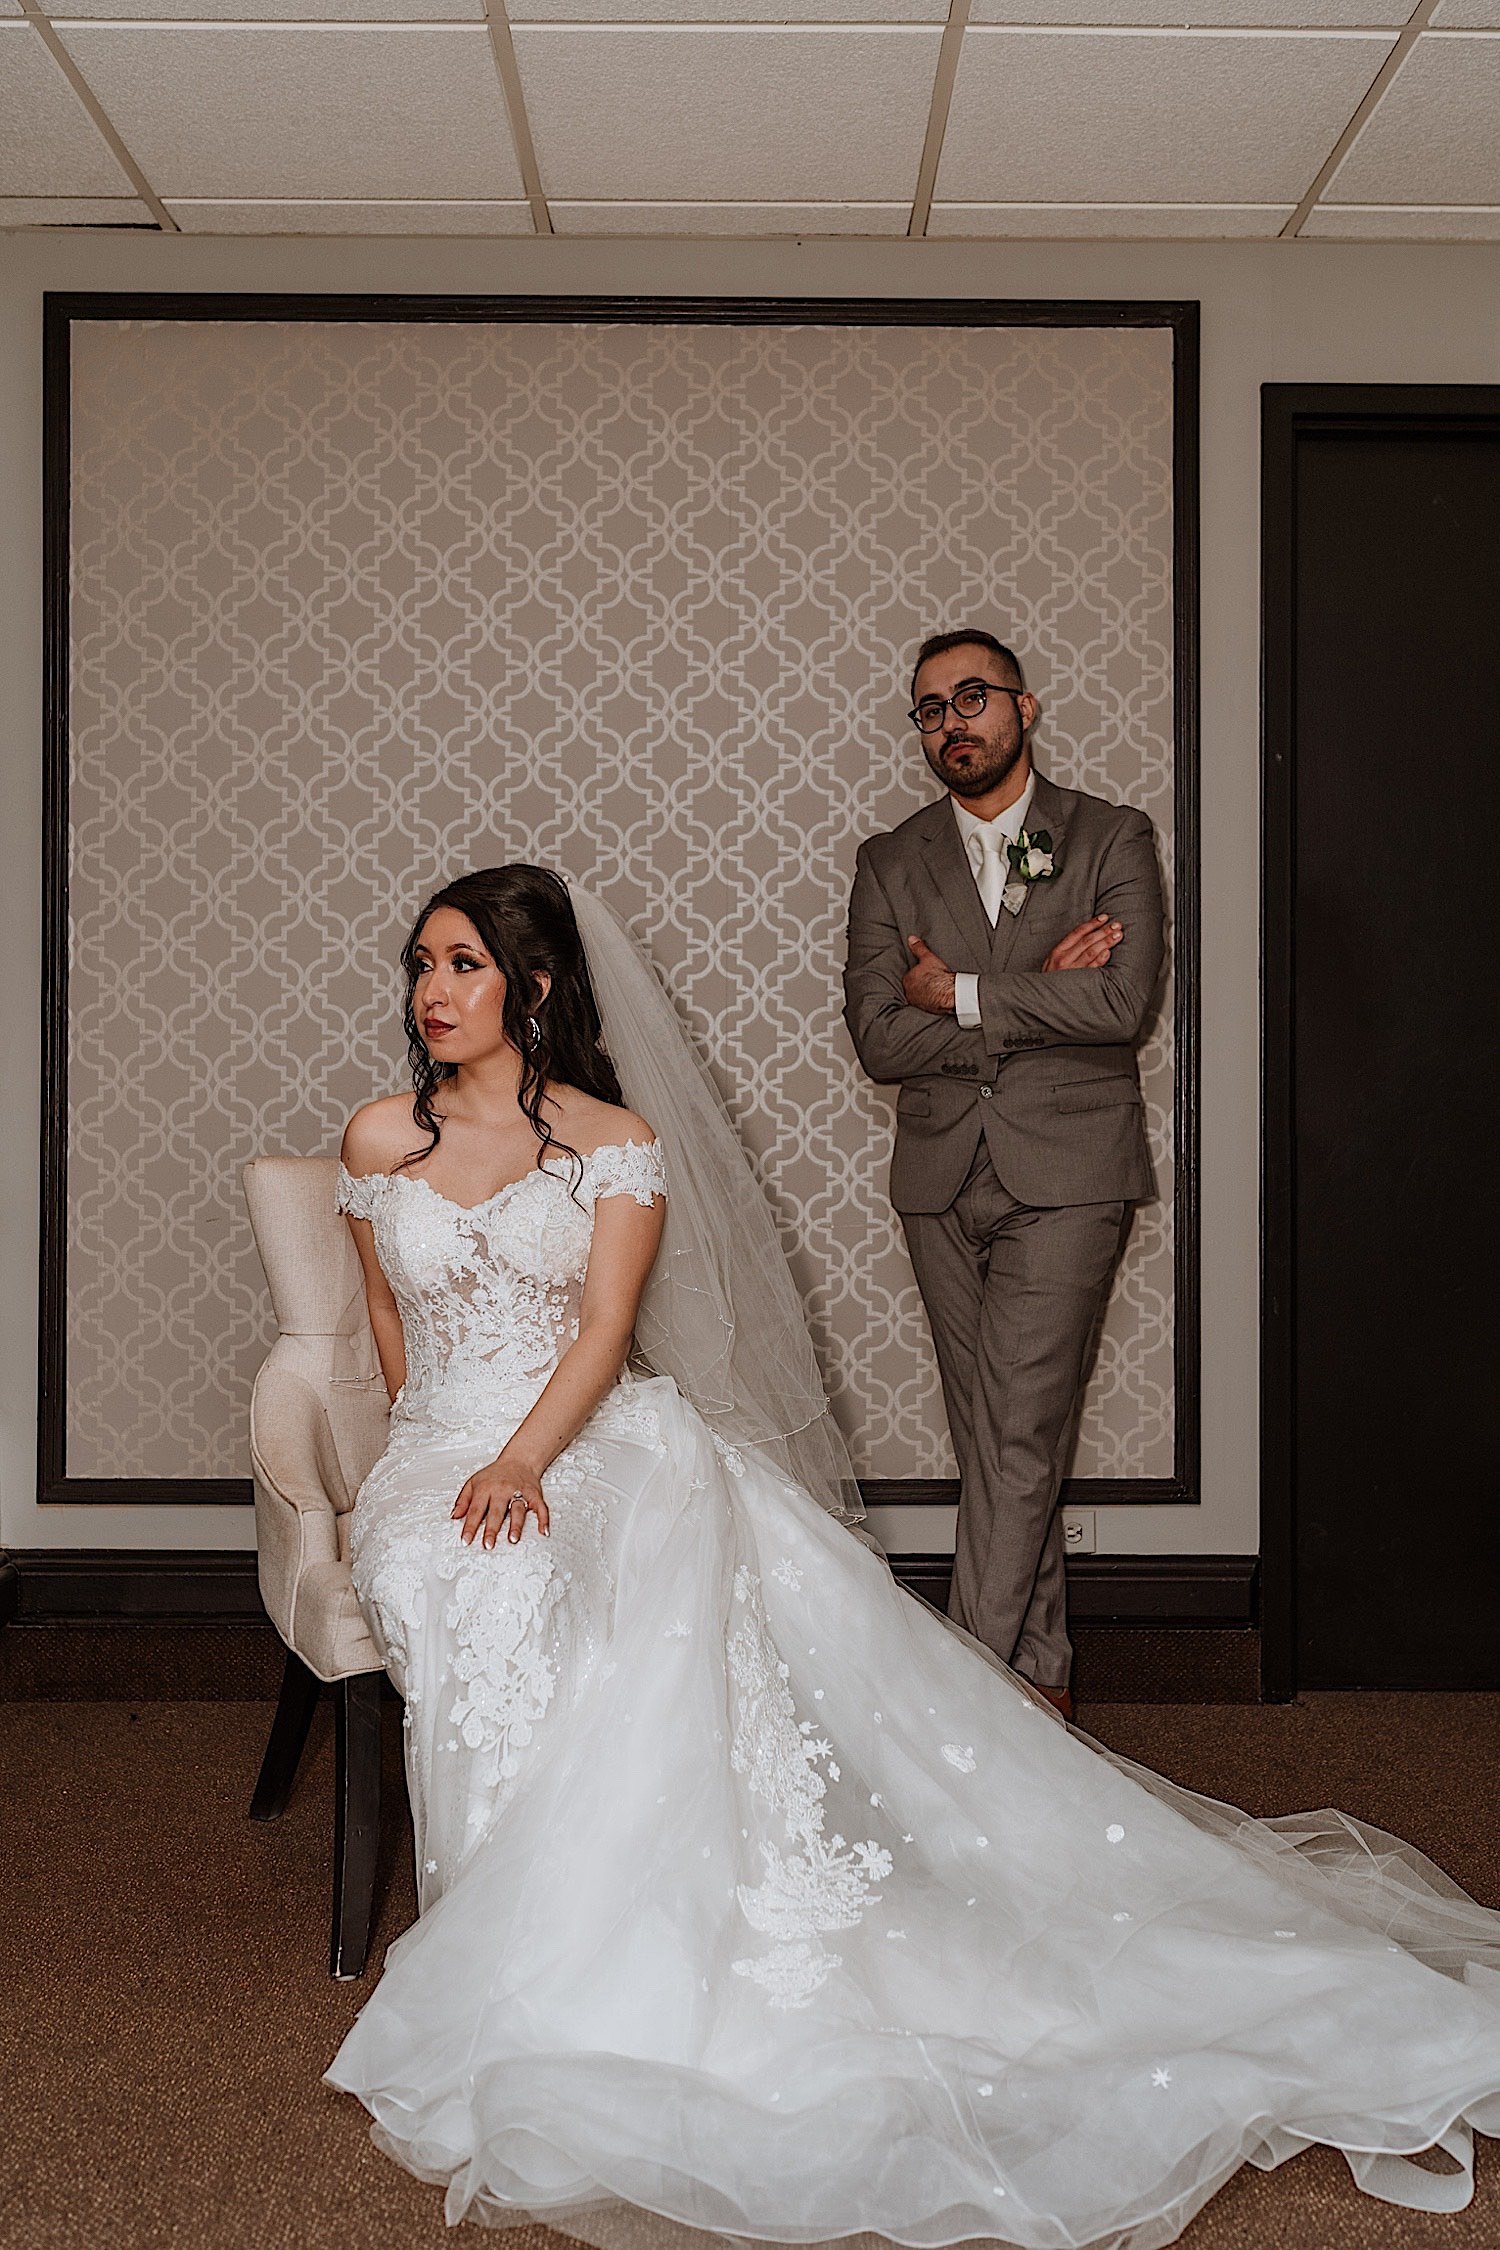 Groom stands behind seated bride as she looks away while he looks at the camera